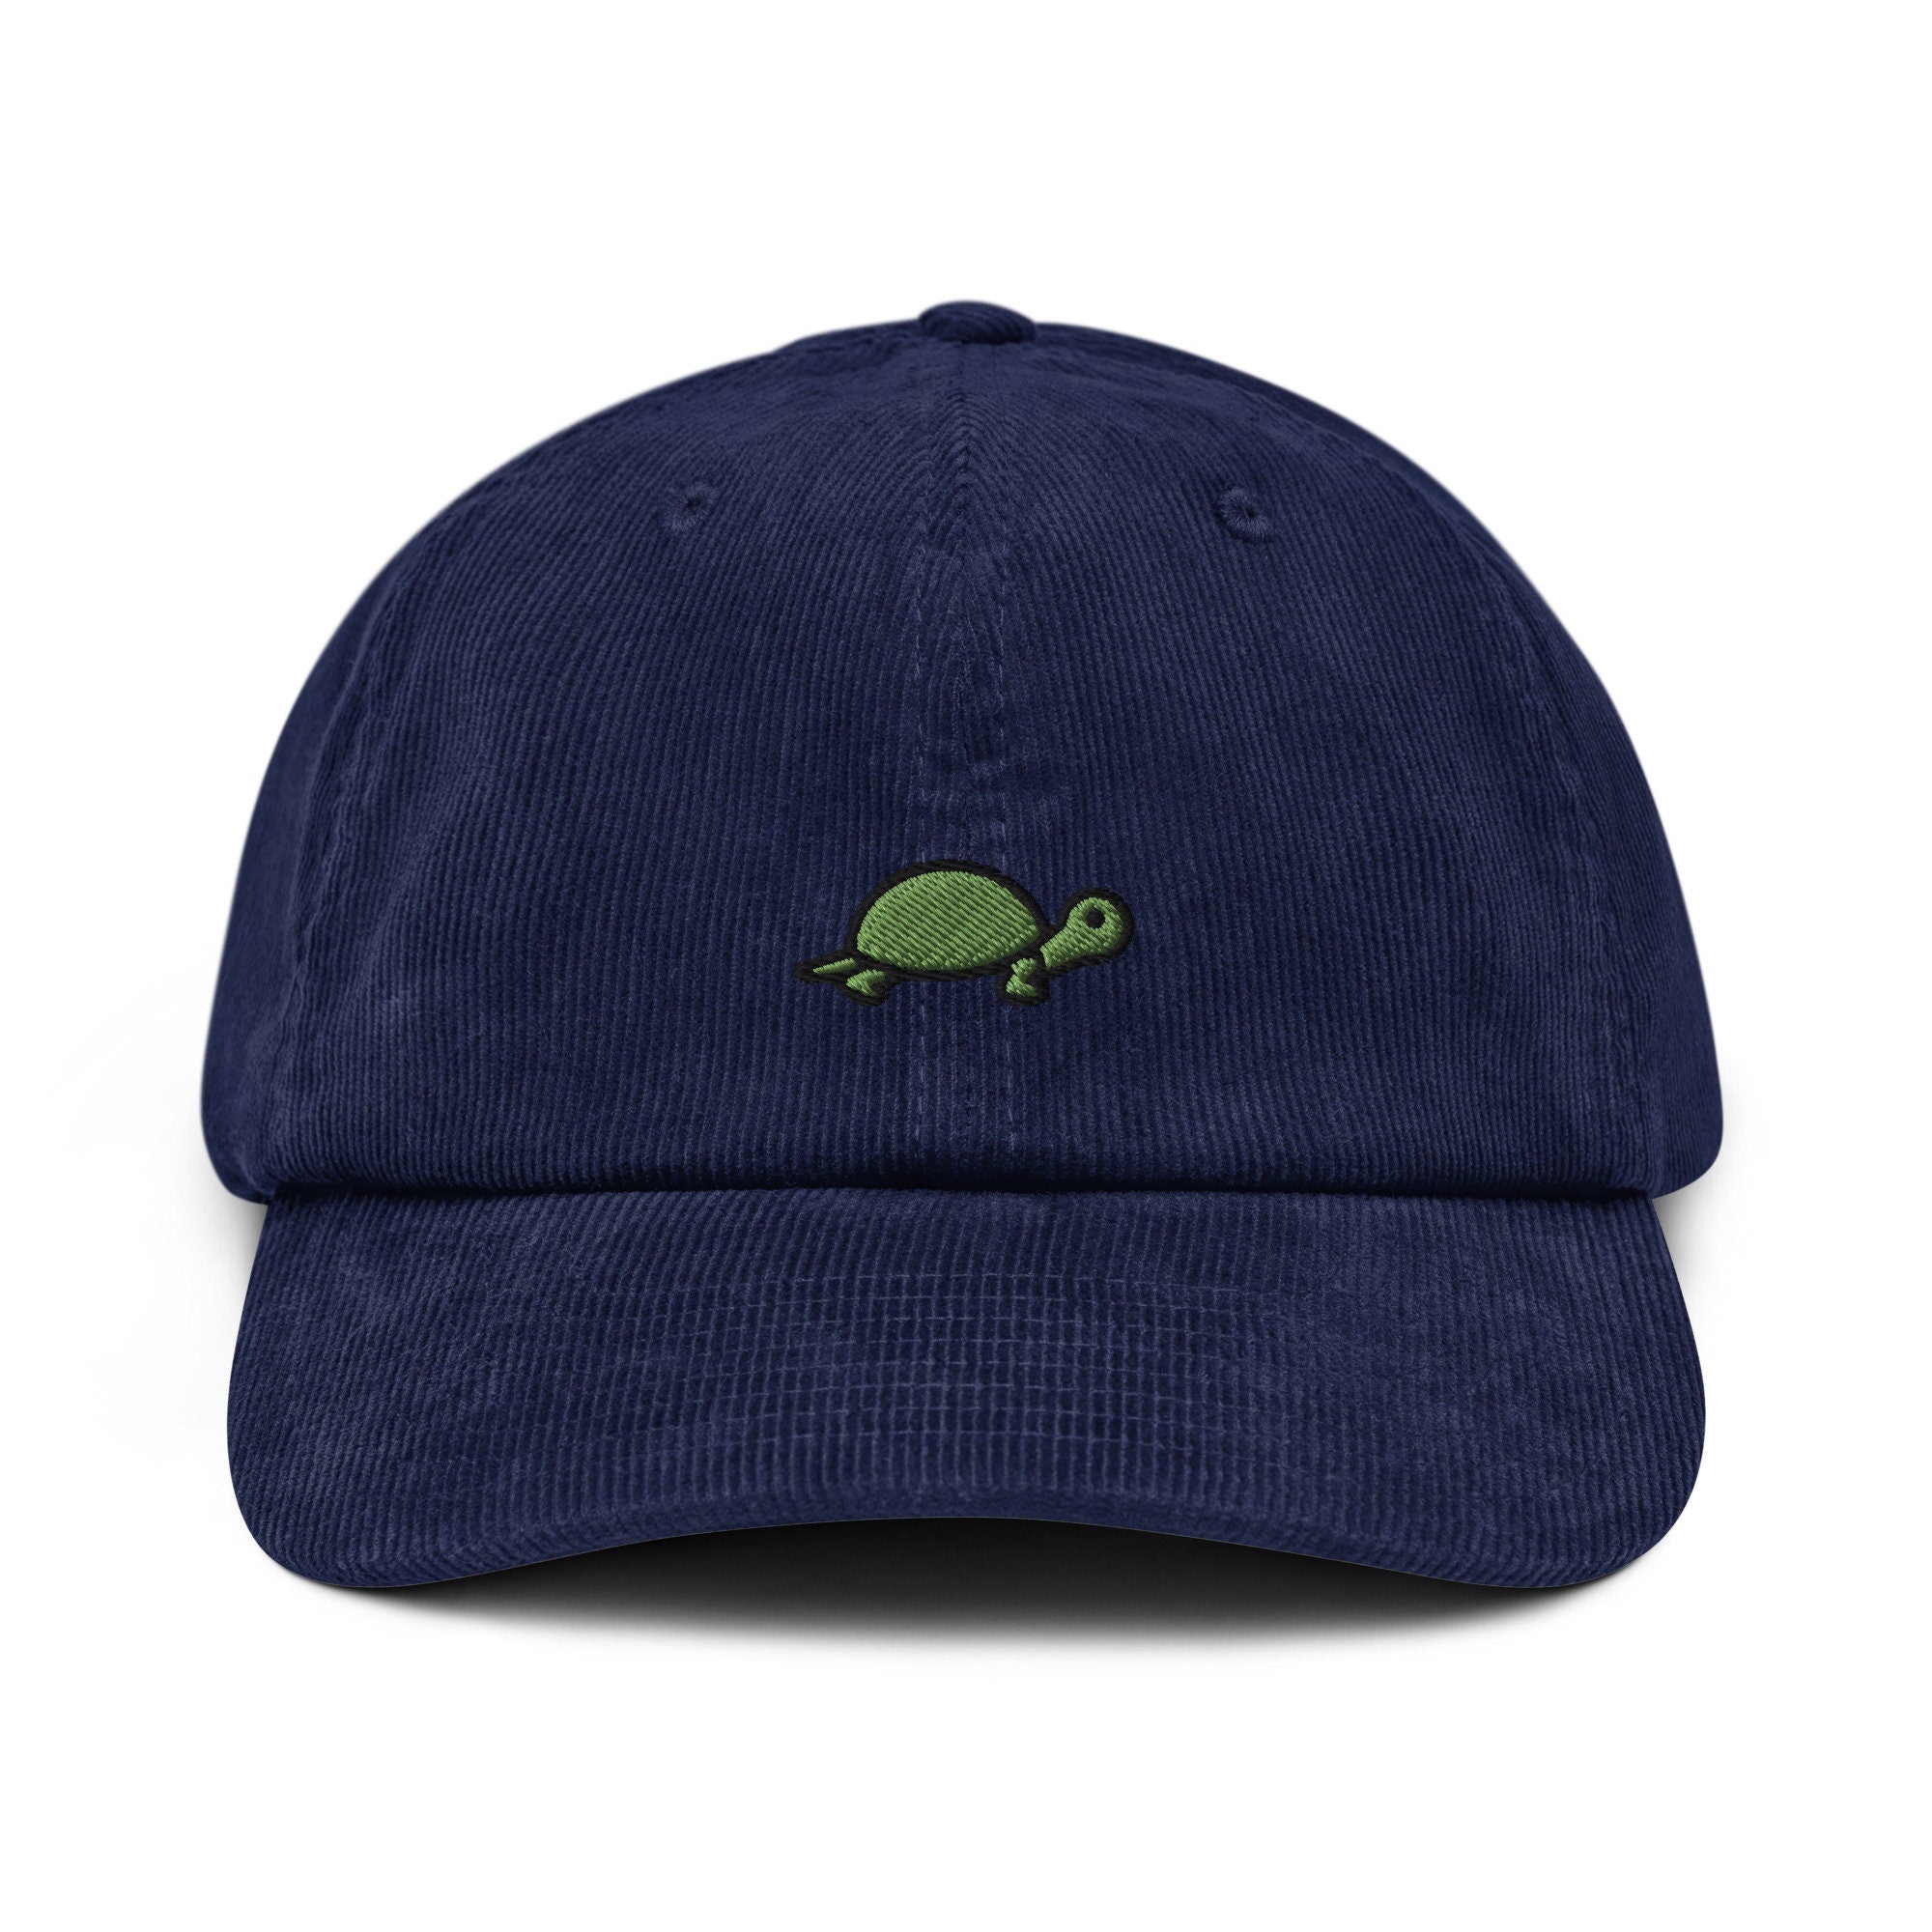 Turtle Corduroy Hat, Handmade Embroidered Corduroy Dad Cap - Multiple Colors